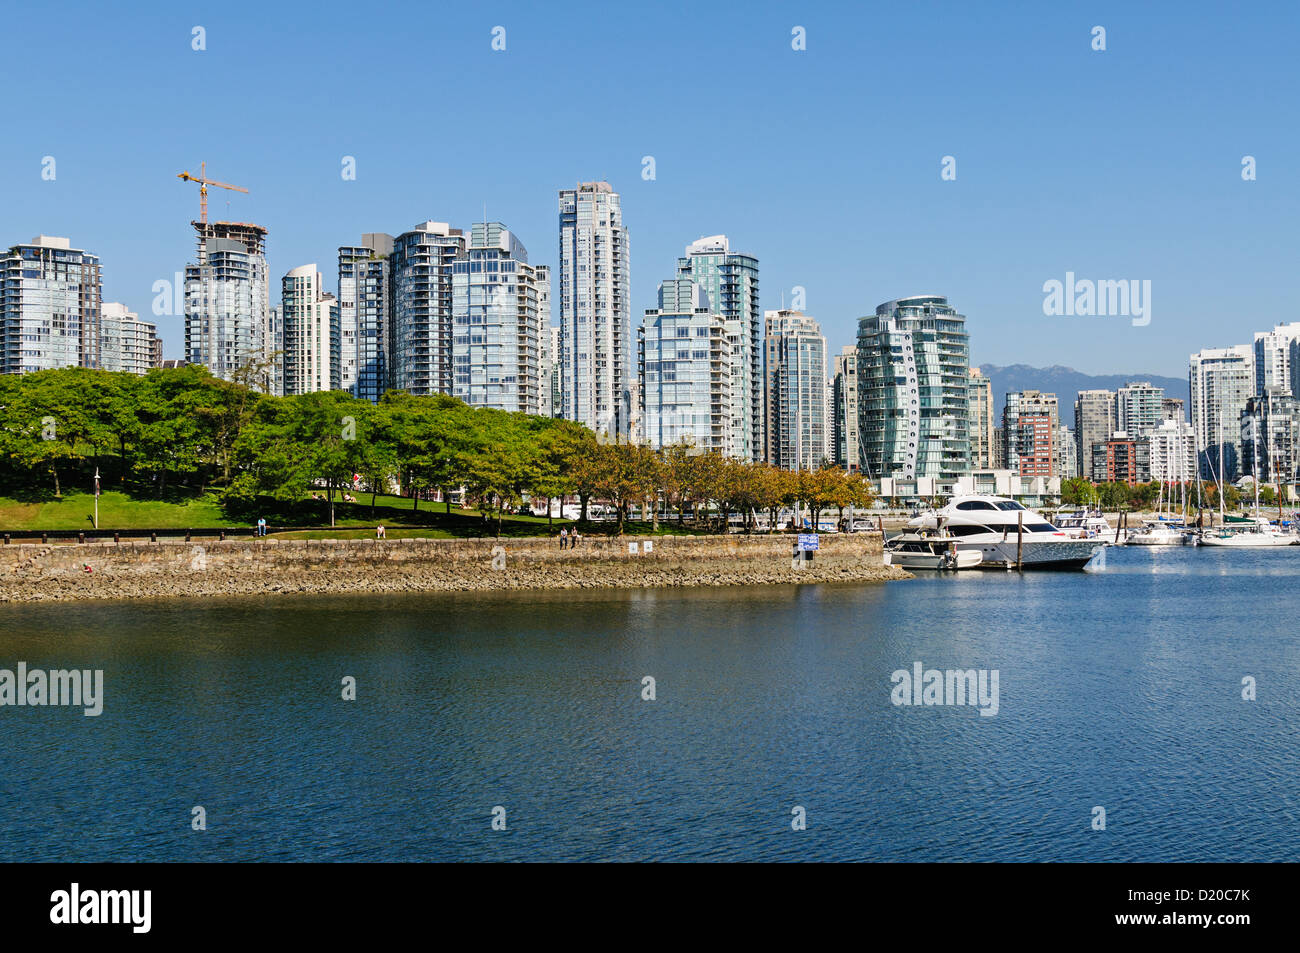 A scenic view from the south side of Vancouver's False Creek waterway looking towards Granville Island and the Yaletown area. Stock Photo